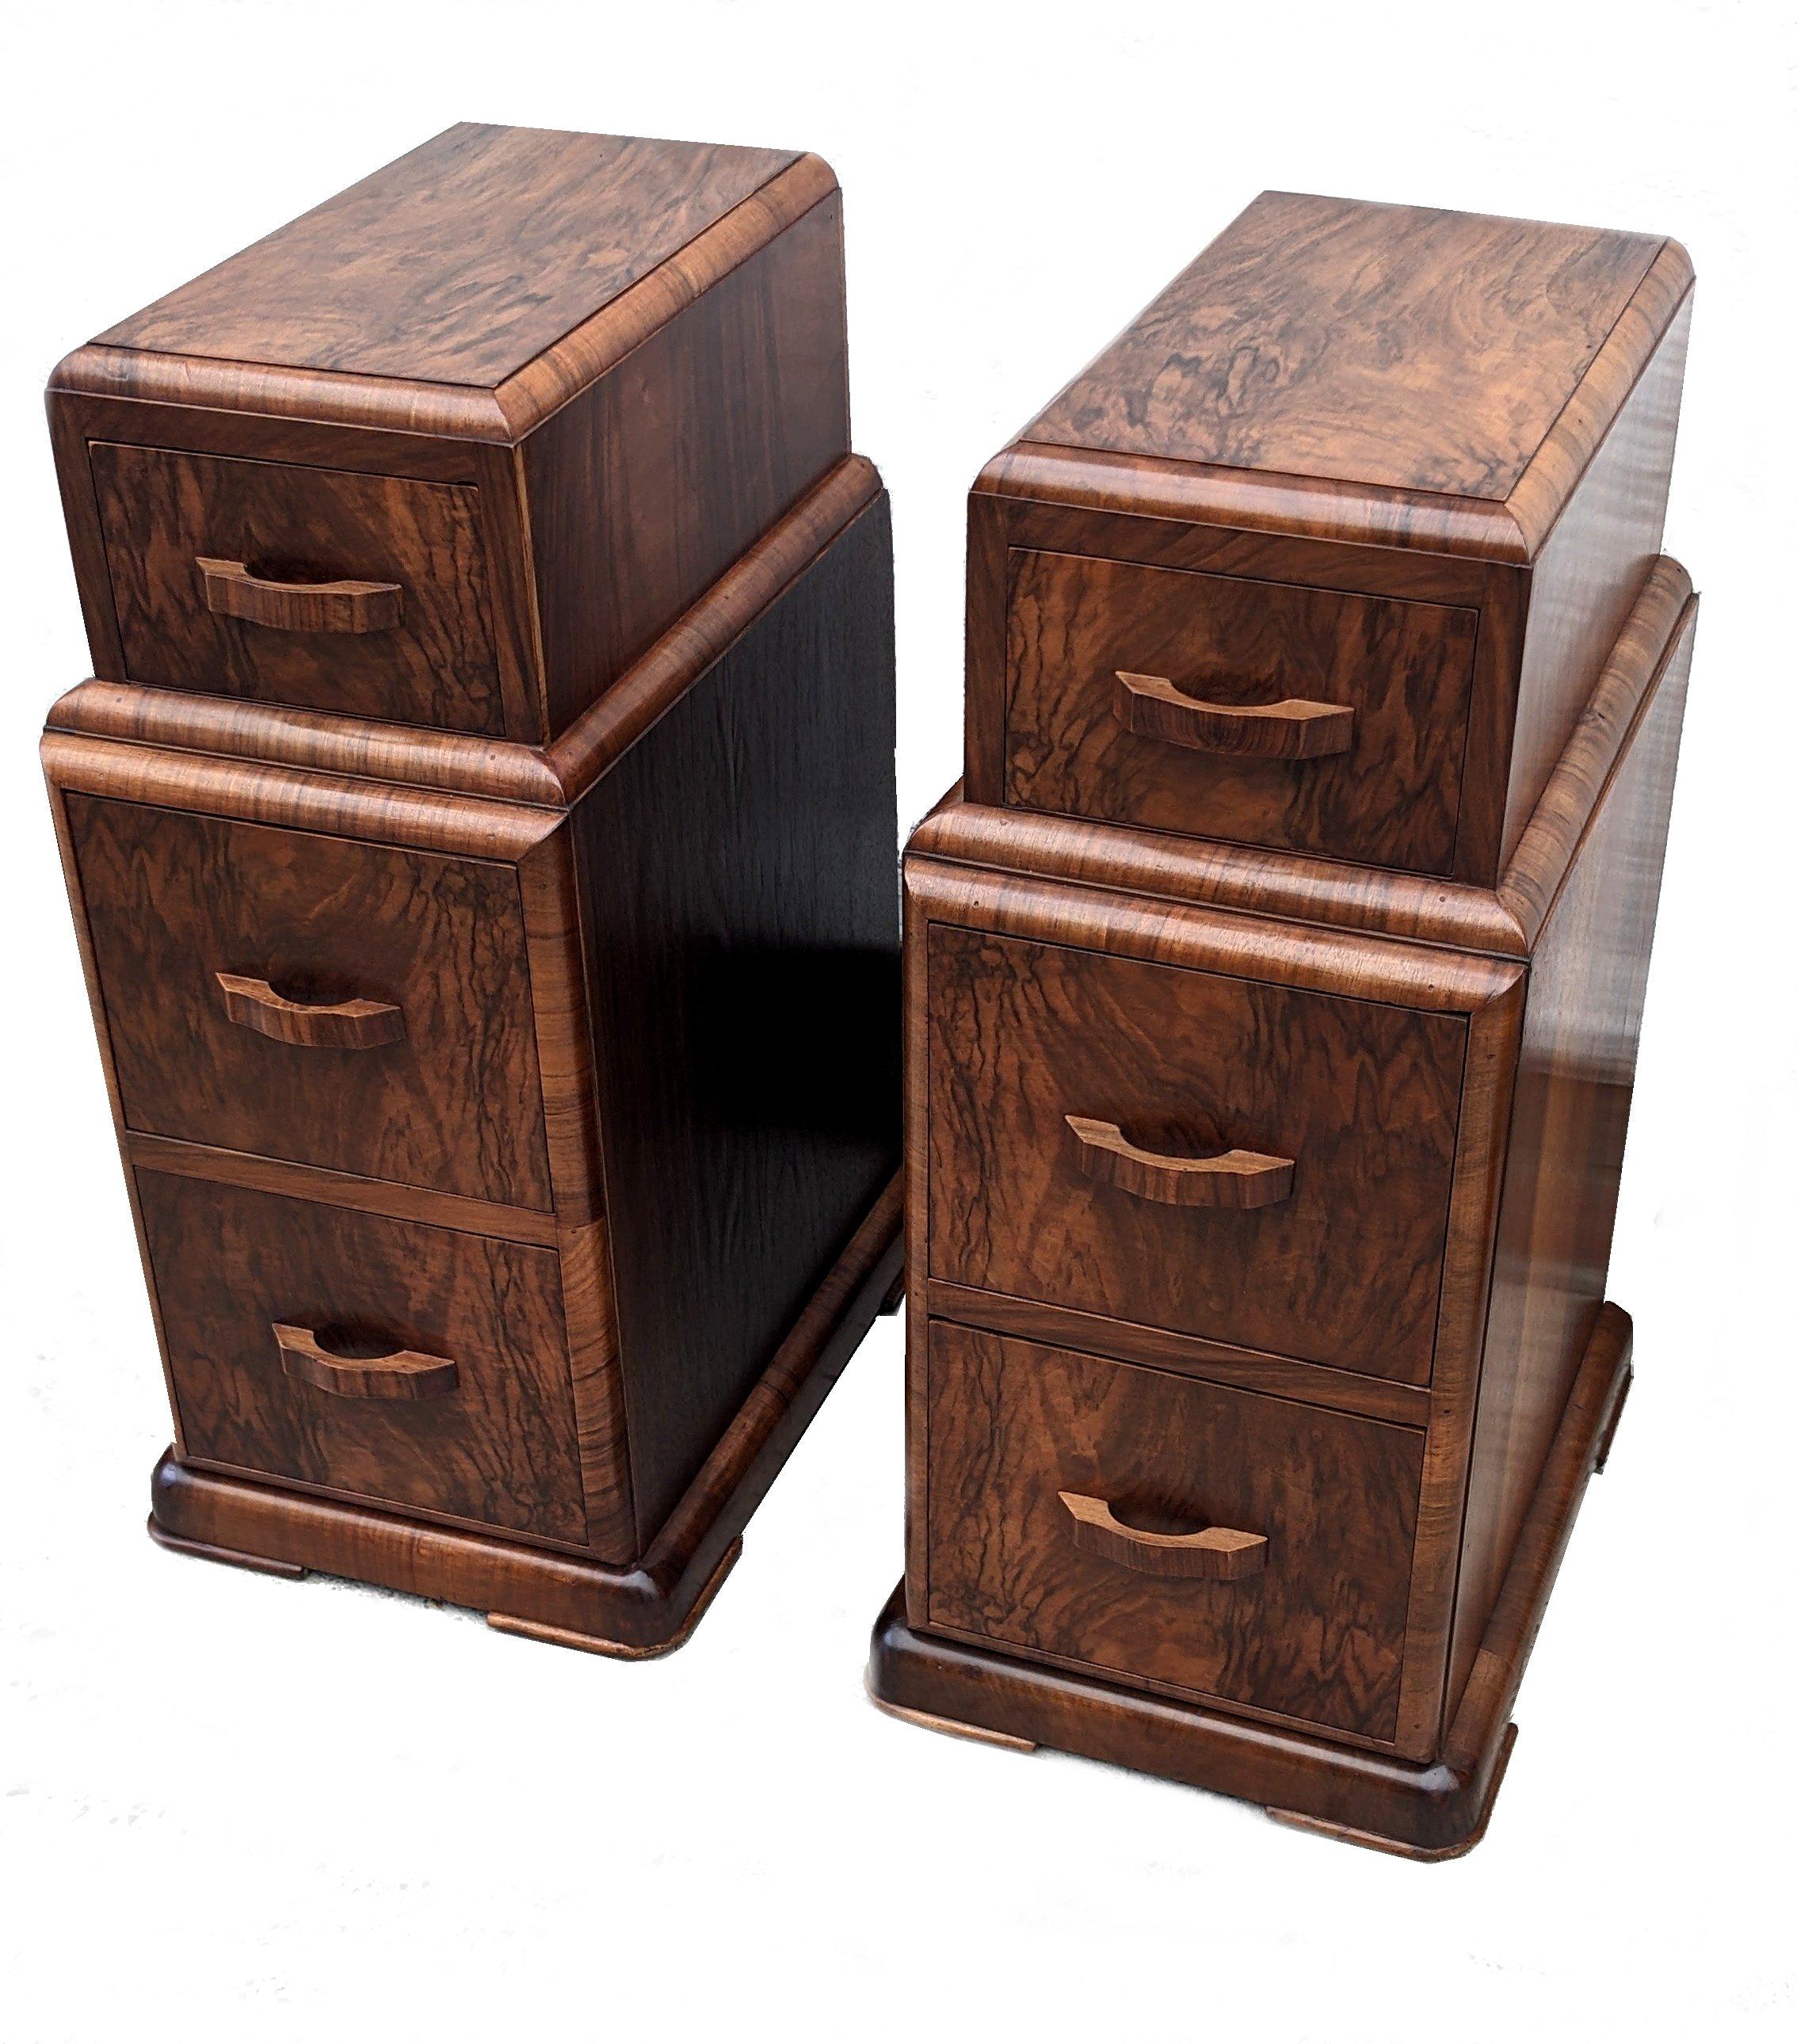 English Art Deco Pair of Matching Walnut Bedside Cabinet Night Stands, c1930 For Sale